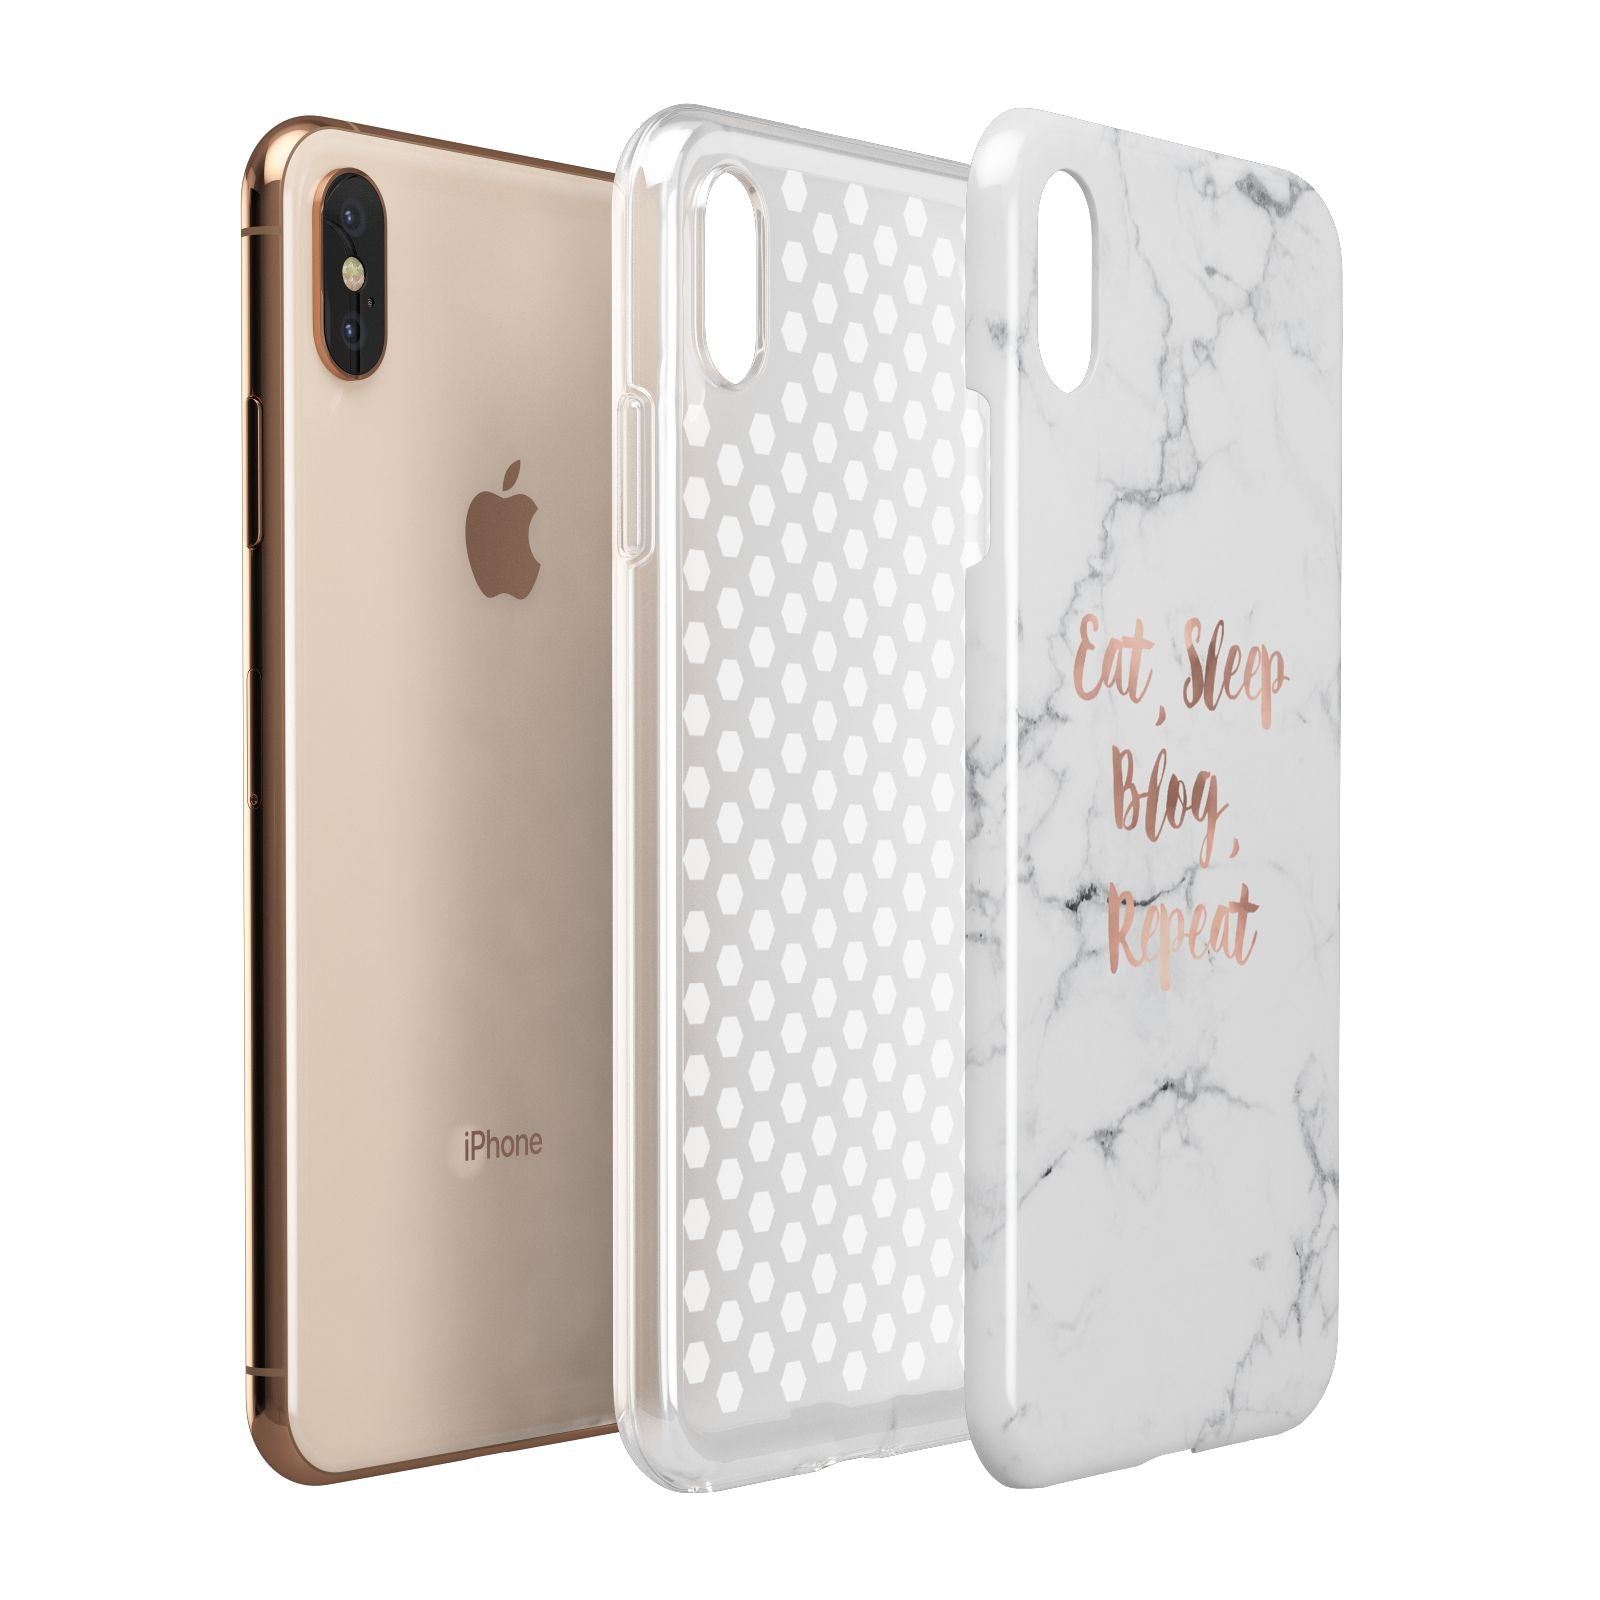 Eat Sleep Blog Repeat Marble Effect Apple iPhone Xs Max 3D Tough Case Expanded View